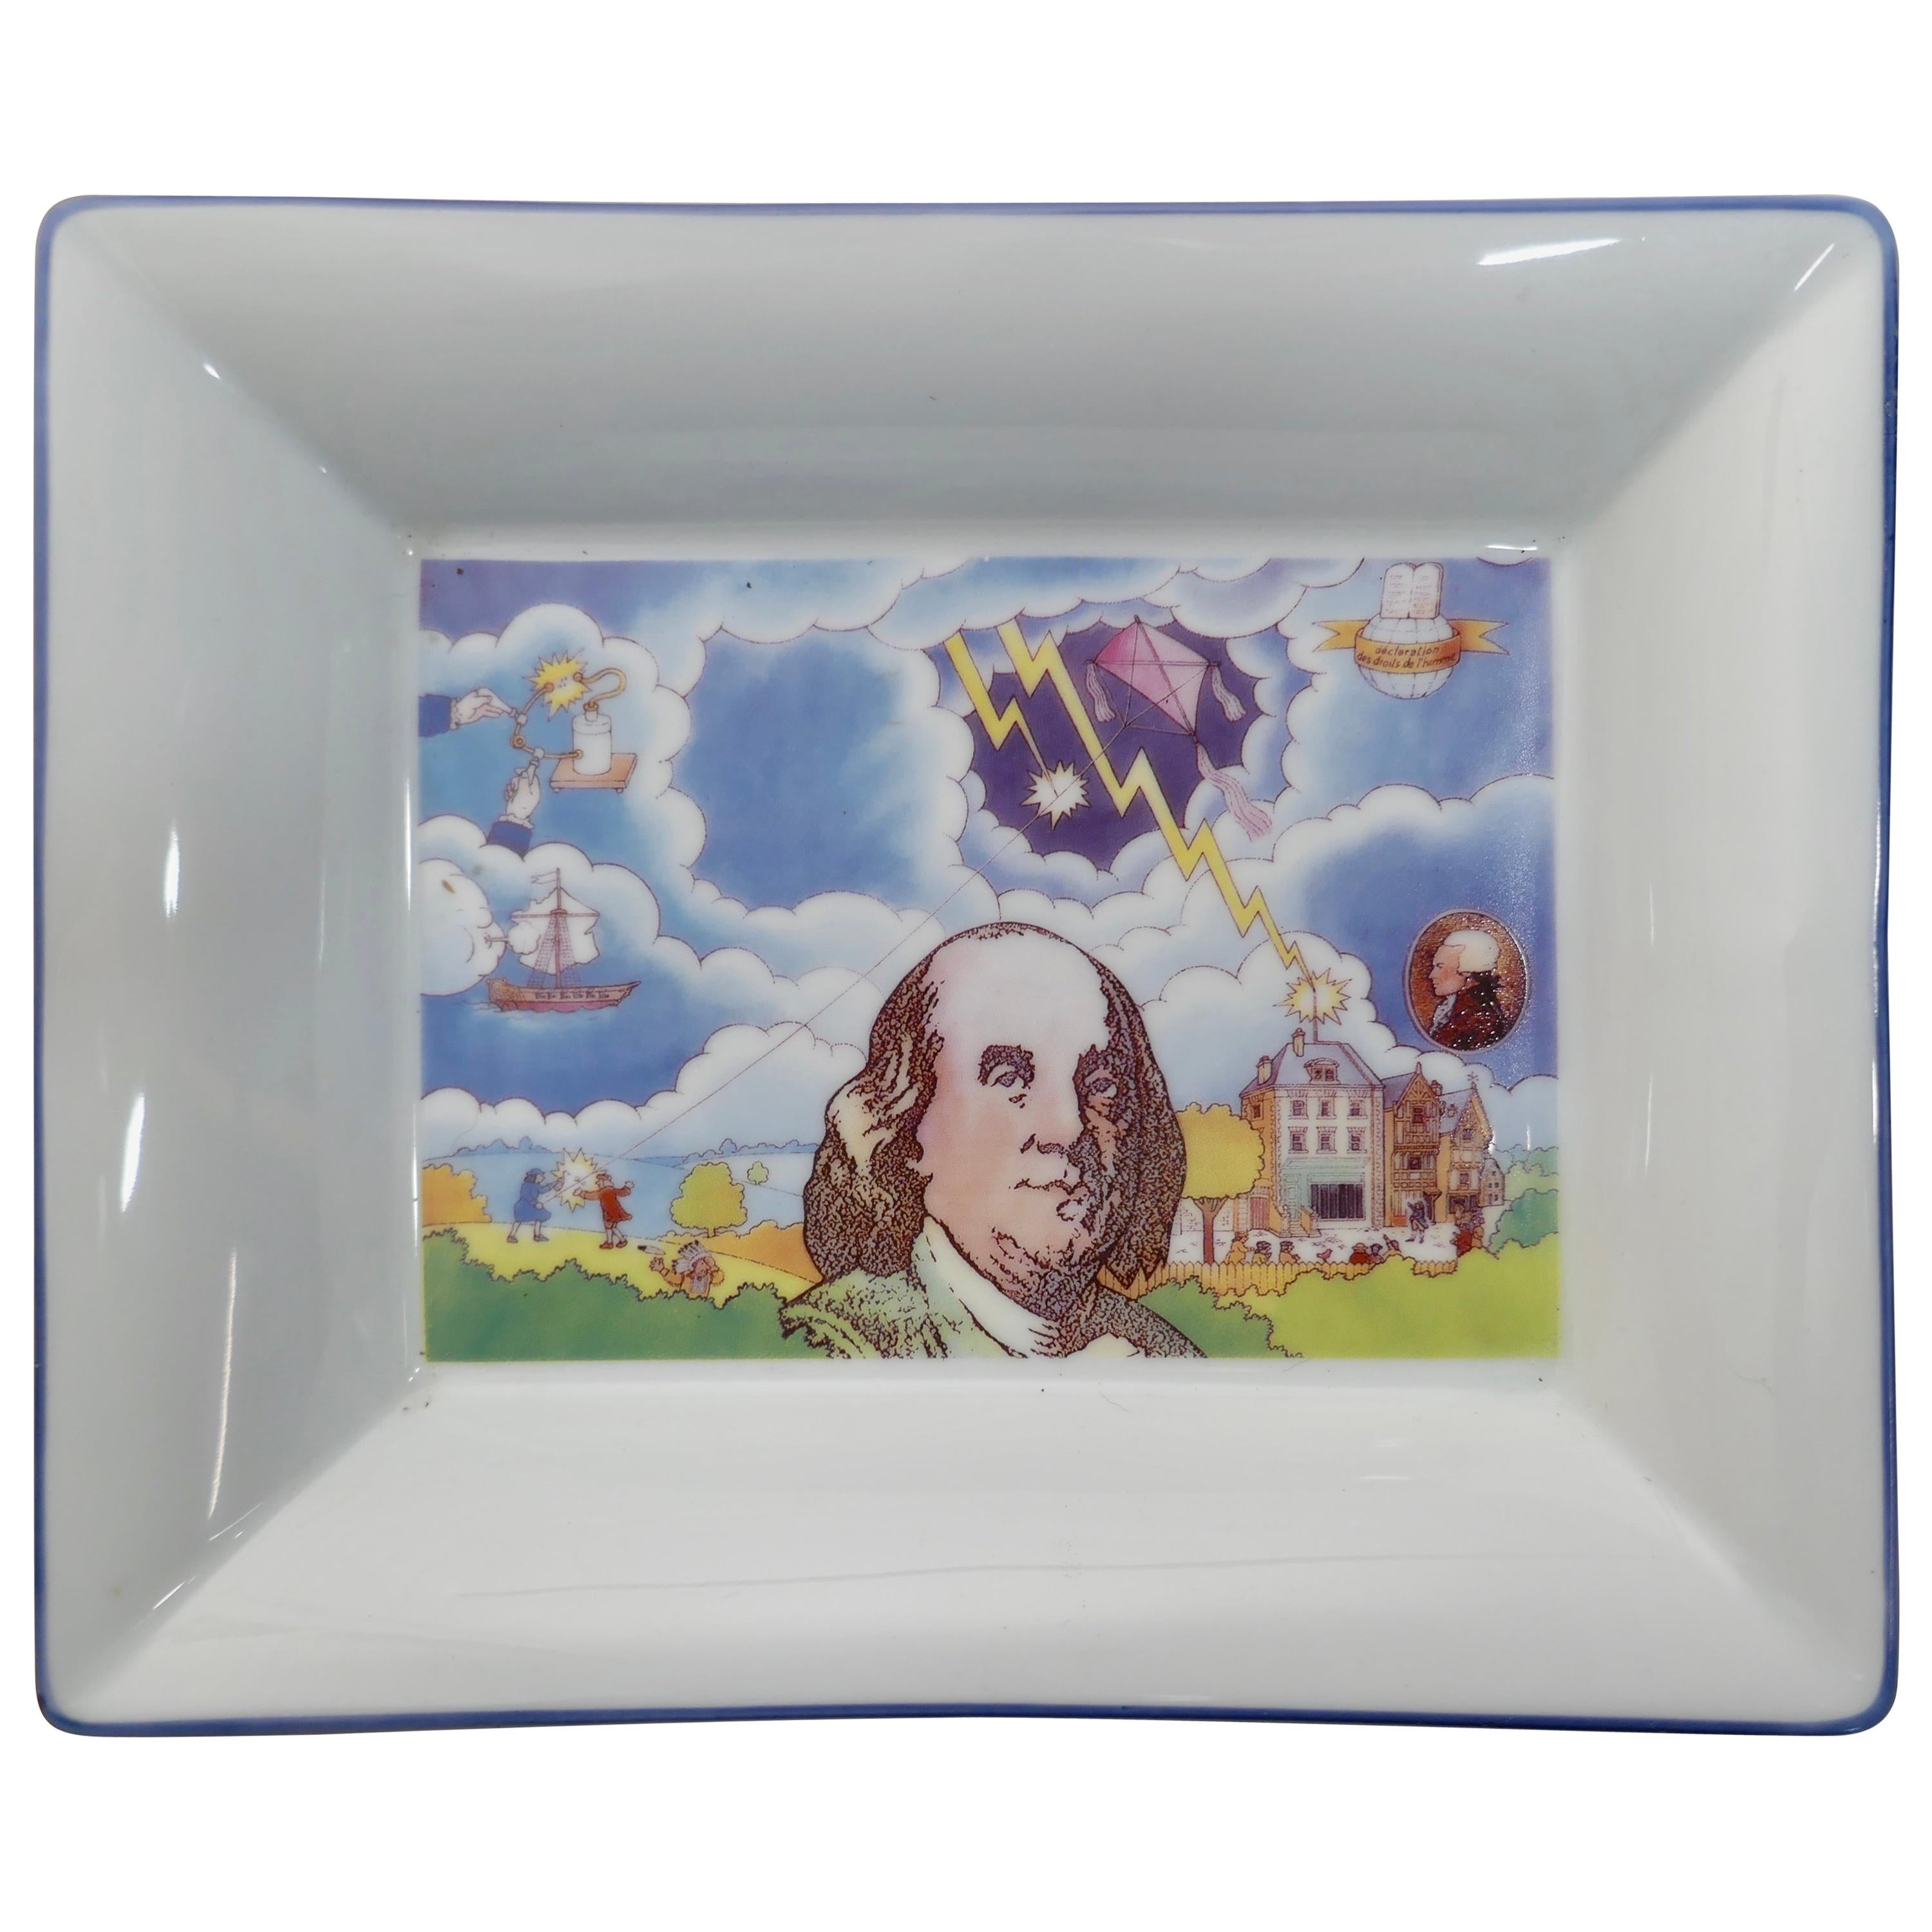 Dish Commemorating Franklin’s Discovery of Electricity by L De Boynes